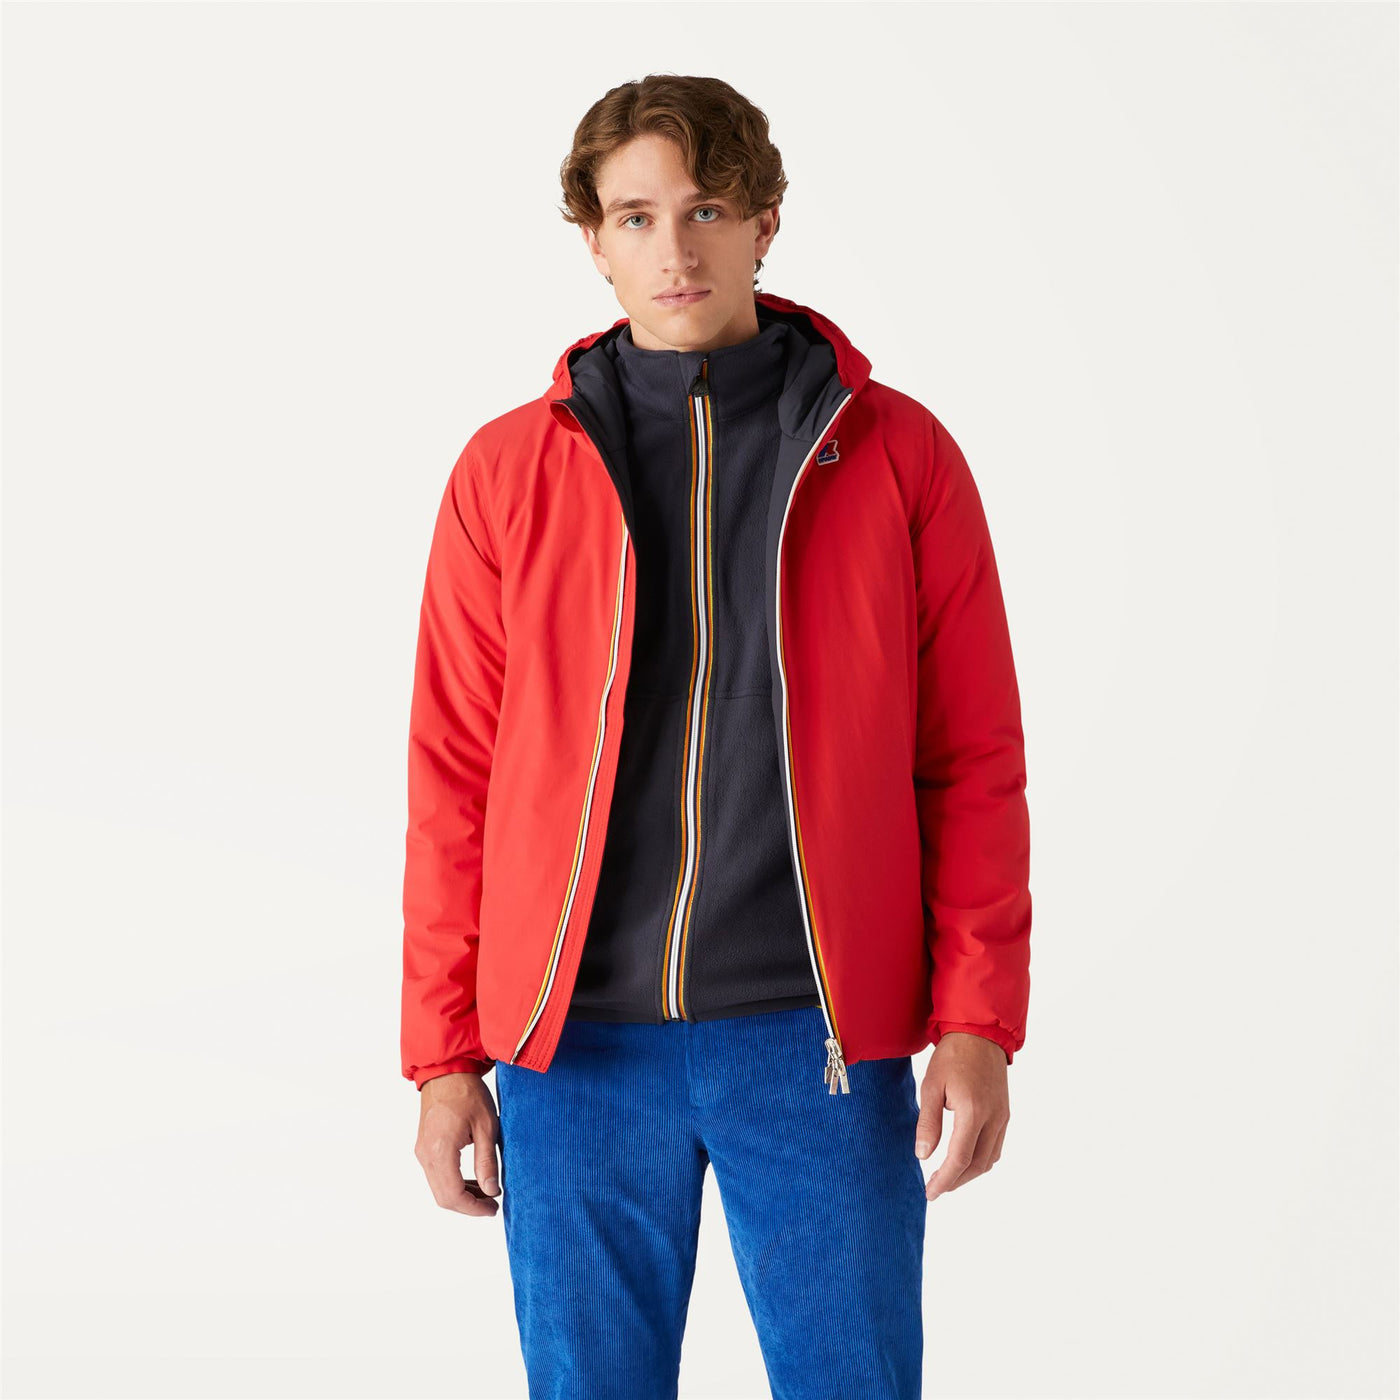 Jackets Man JACQUES WARM DOUBLE Short RED - BLUE DEPTH Dressed Back (jpg Rgb)		